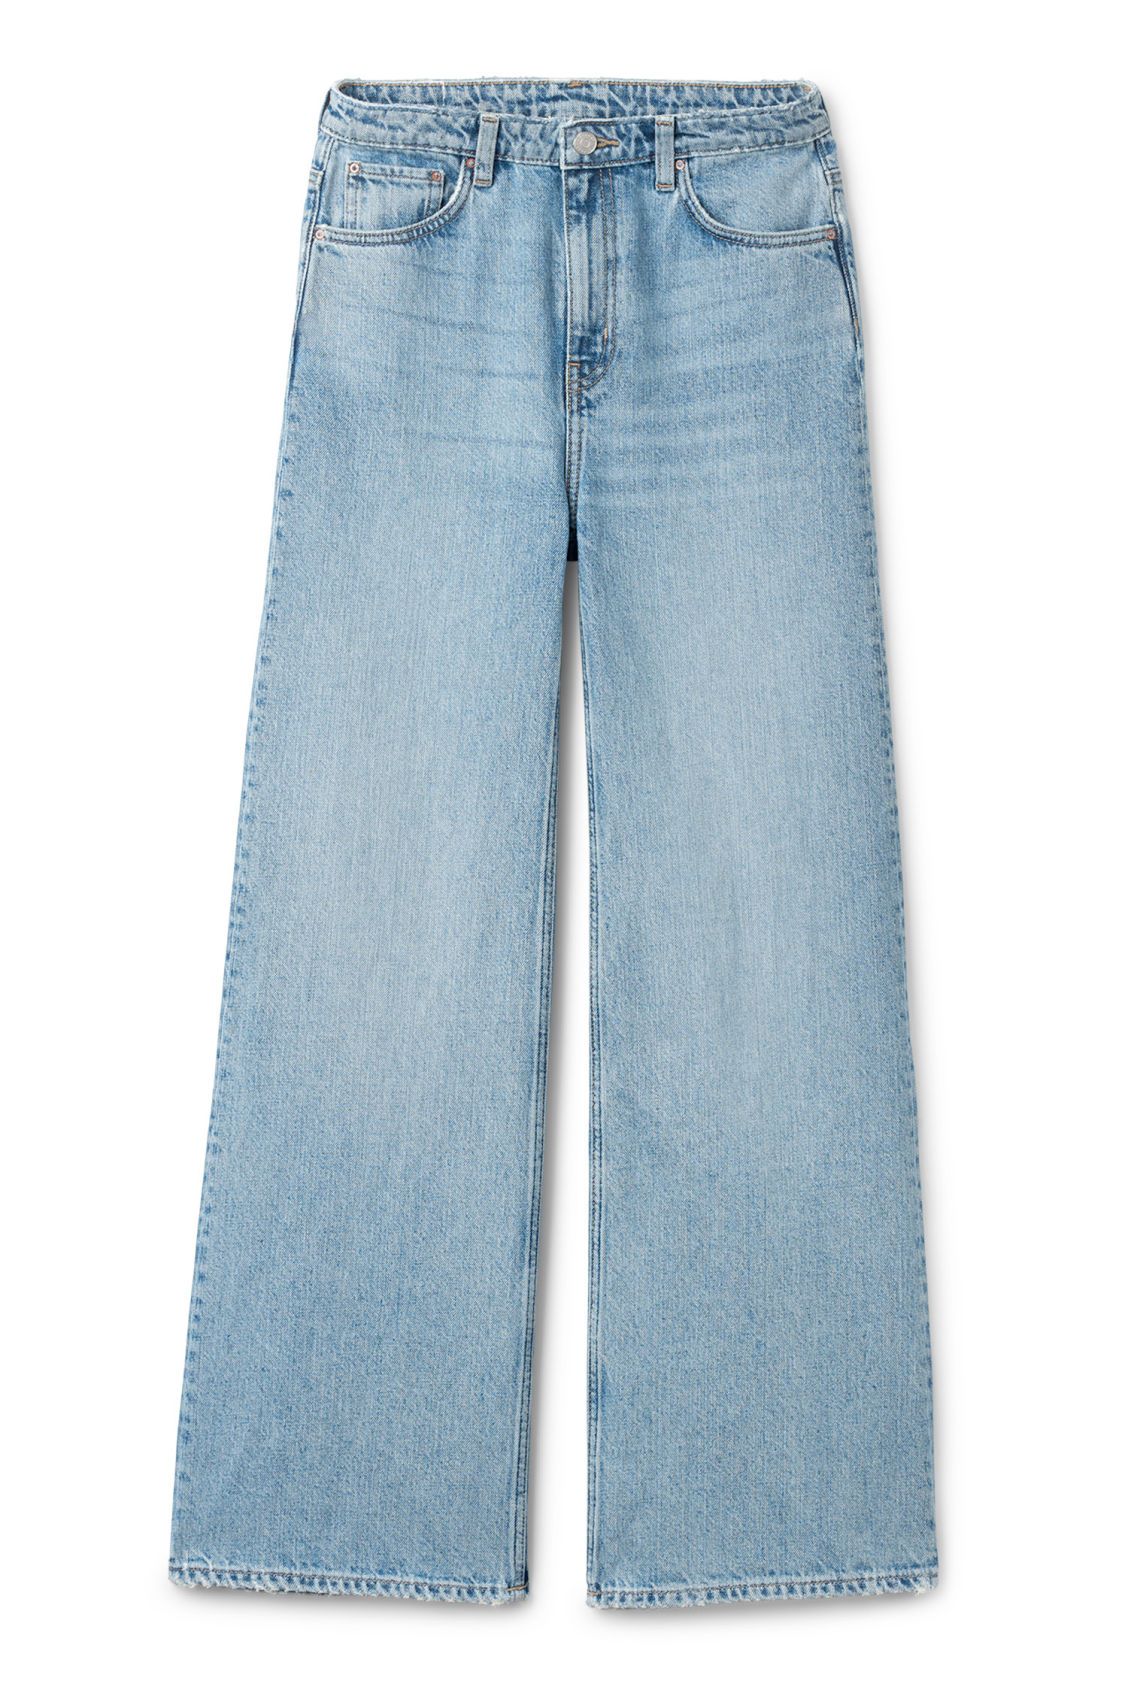 Ace Wow Blue Jeans - Blue | Weekday